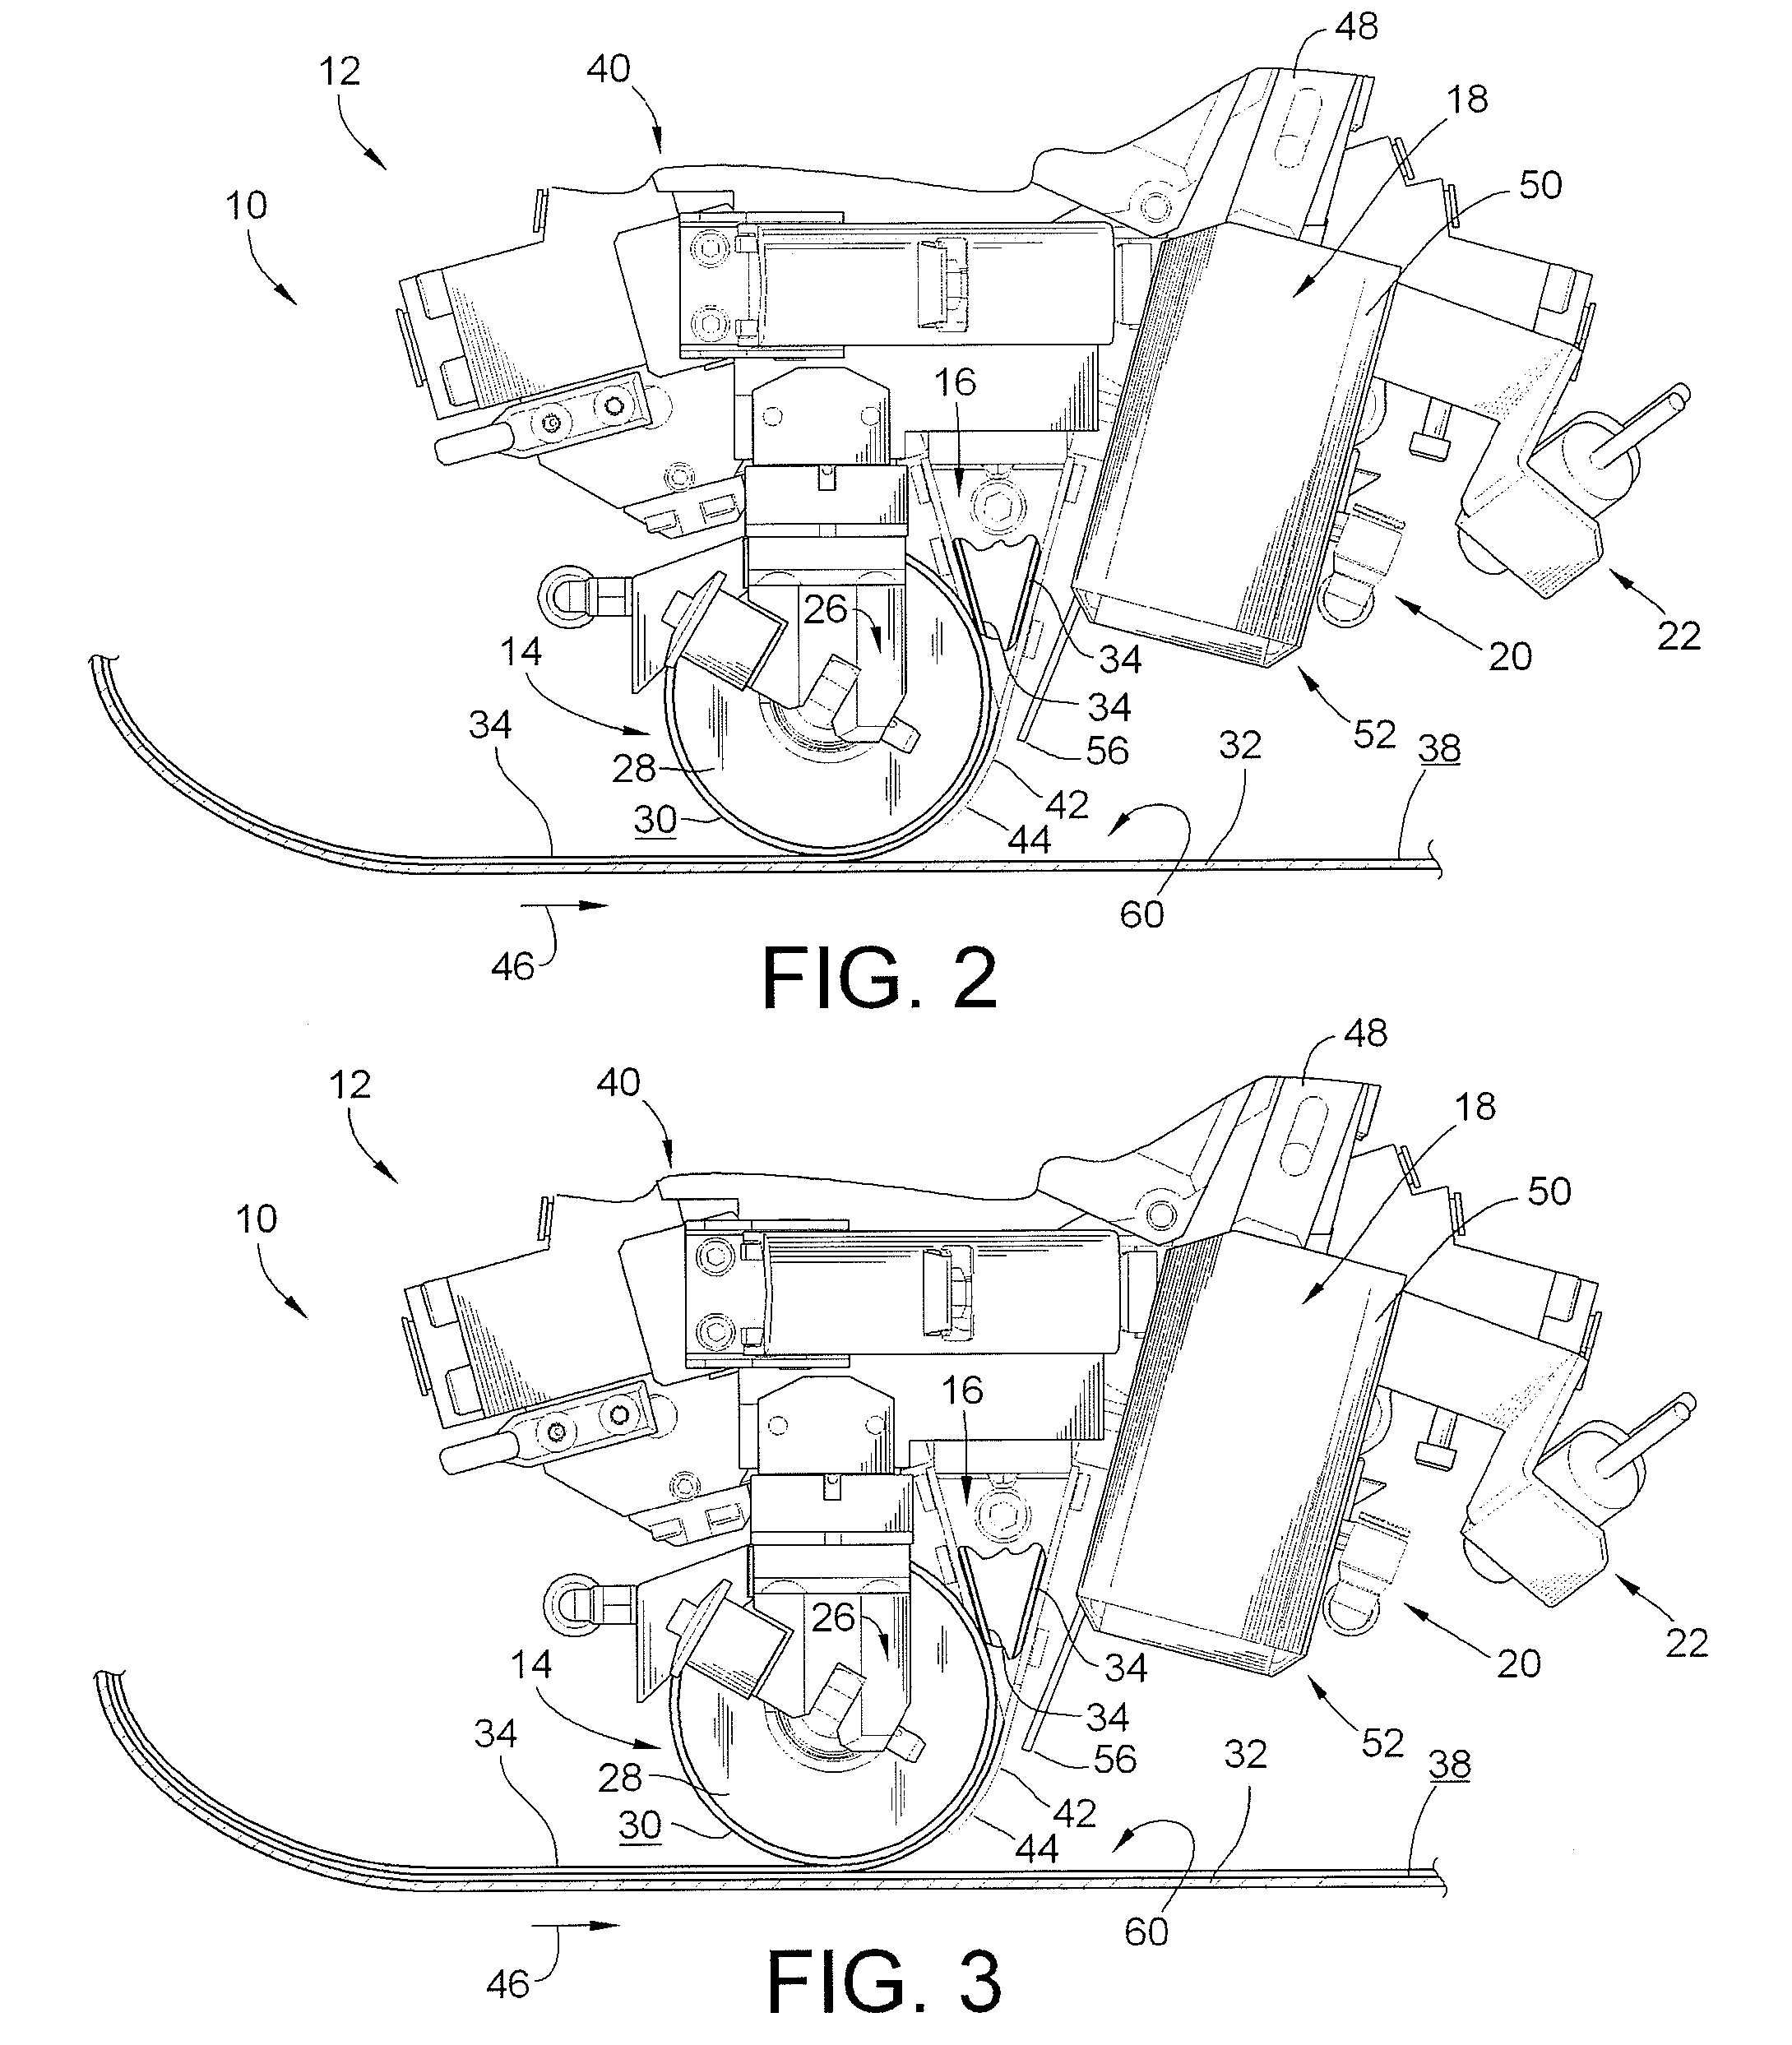 System and method for heating carbon fiber using infrared radiation in a fiber placement machine